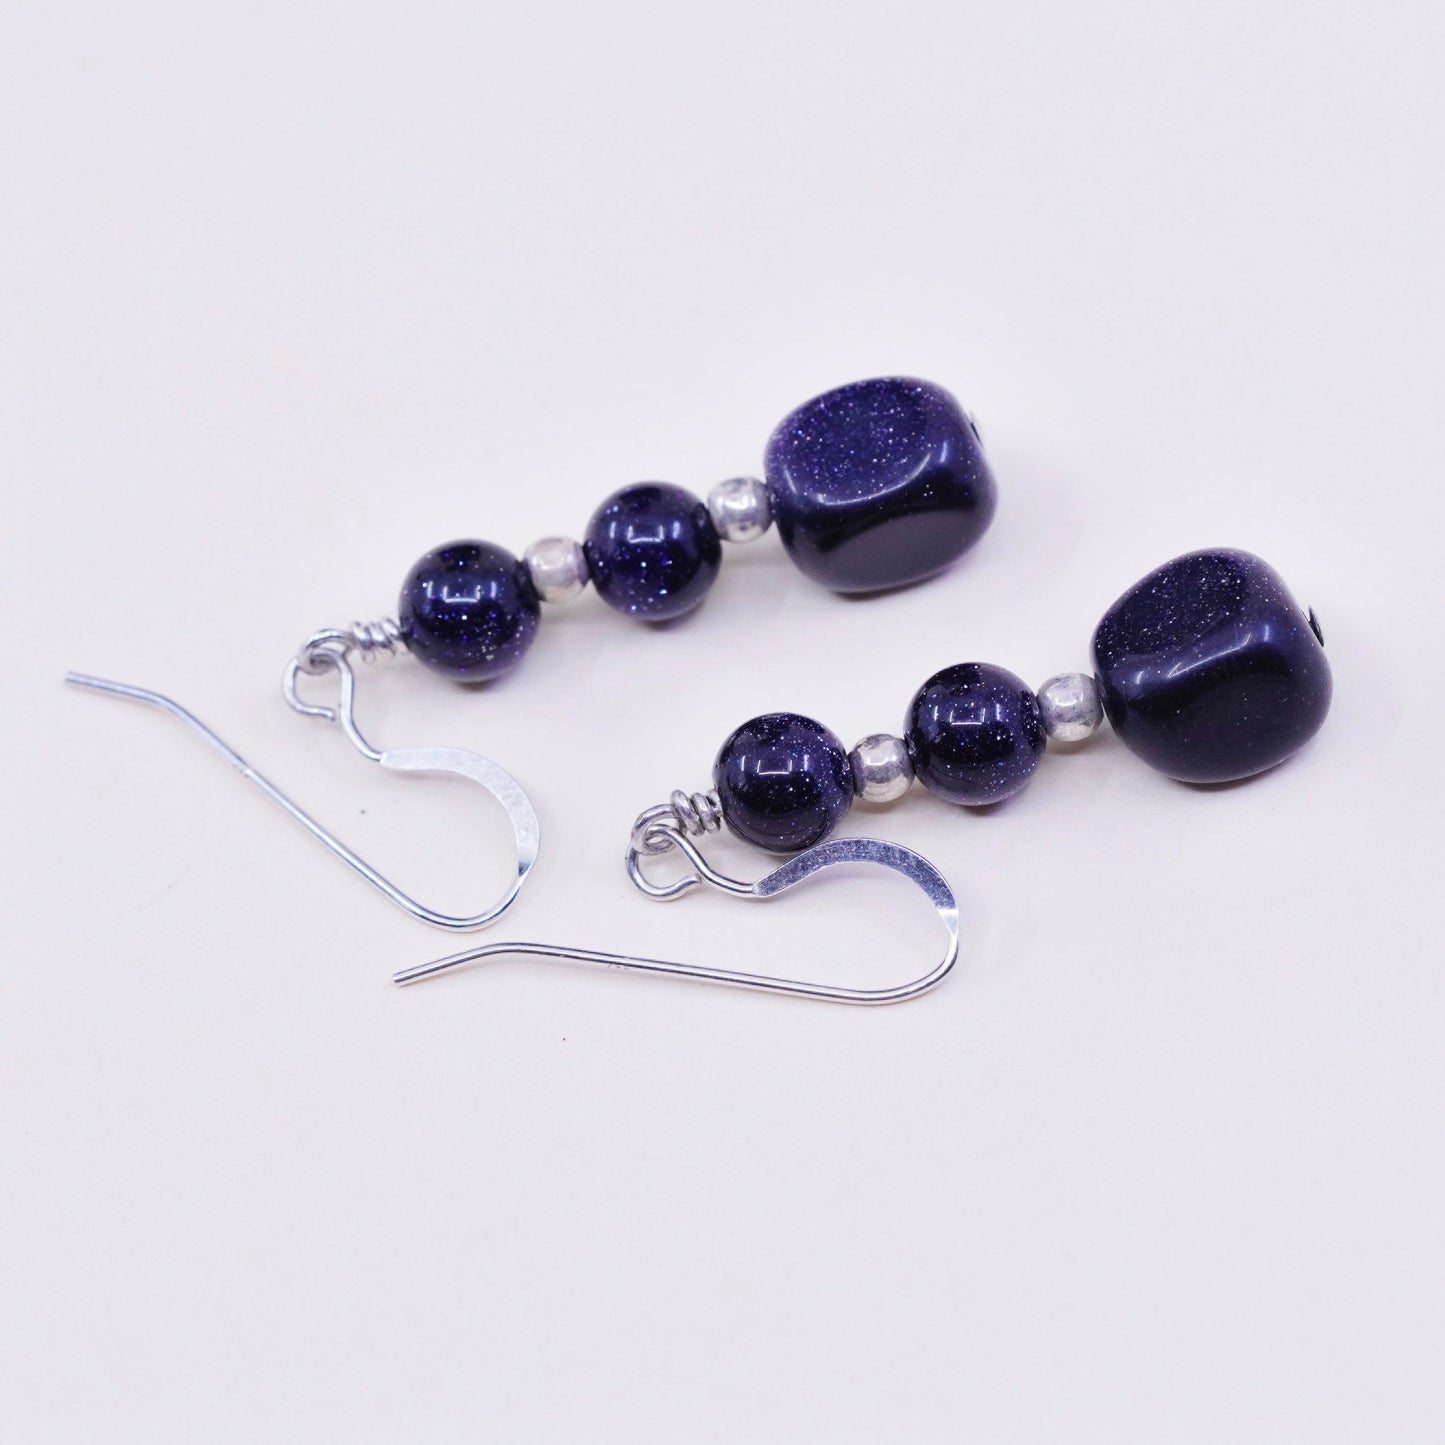 Vintage Sterling silver handmade earrings, 925 hooks with blue glitter cubes, stamped 925